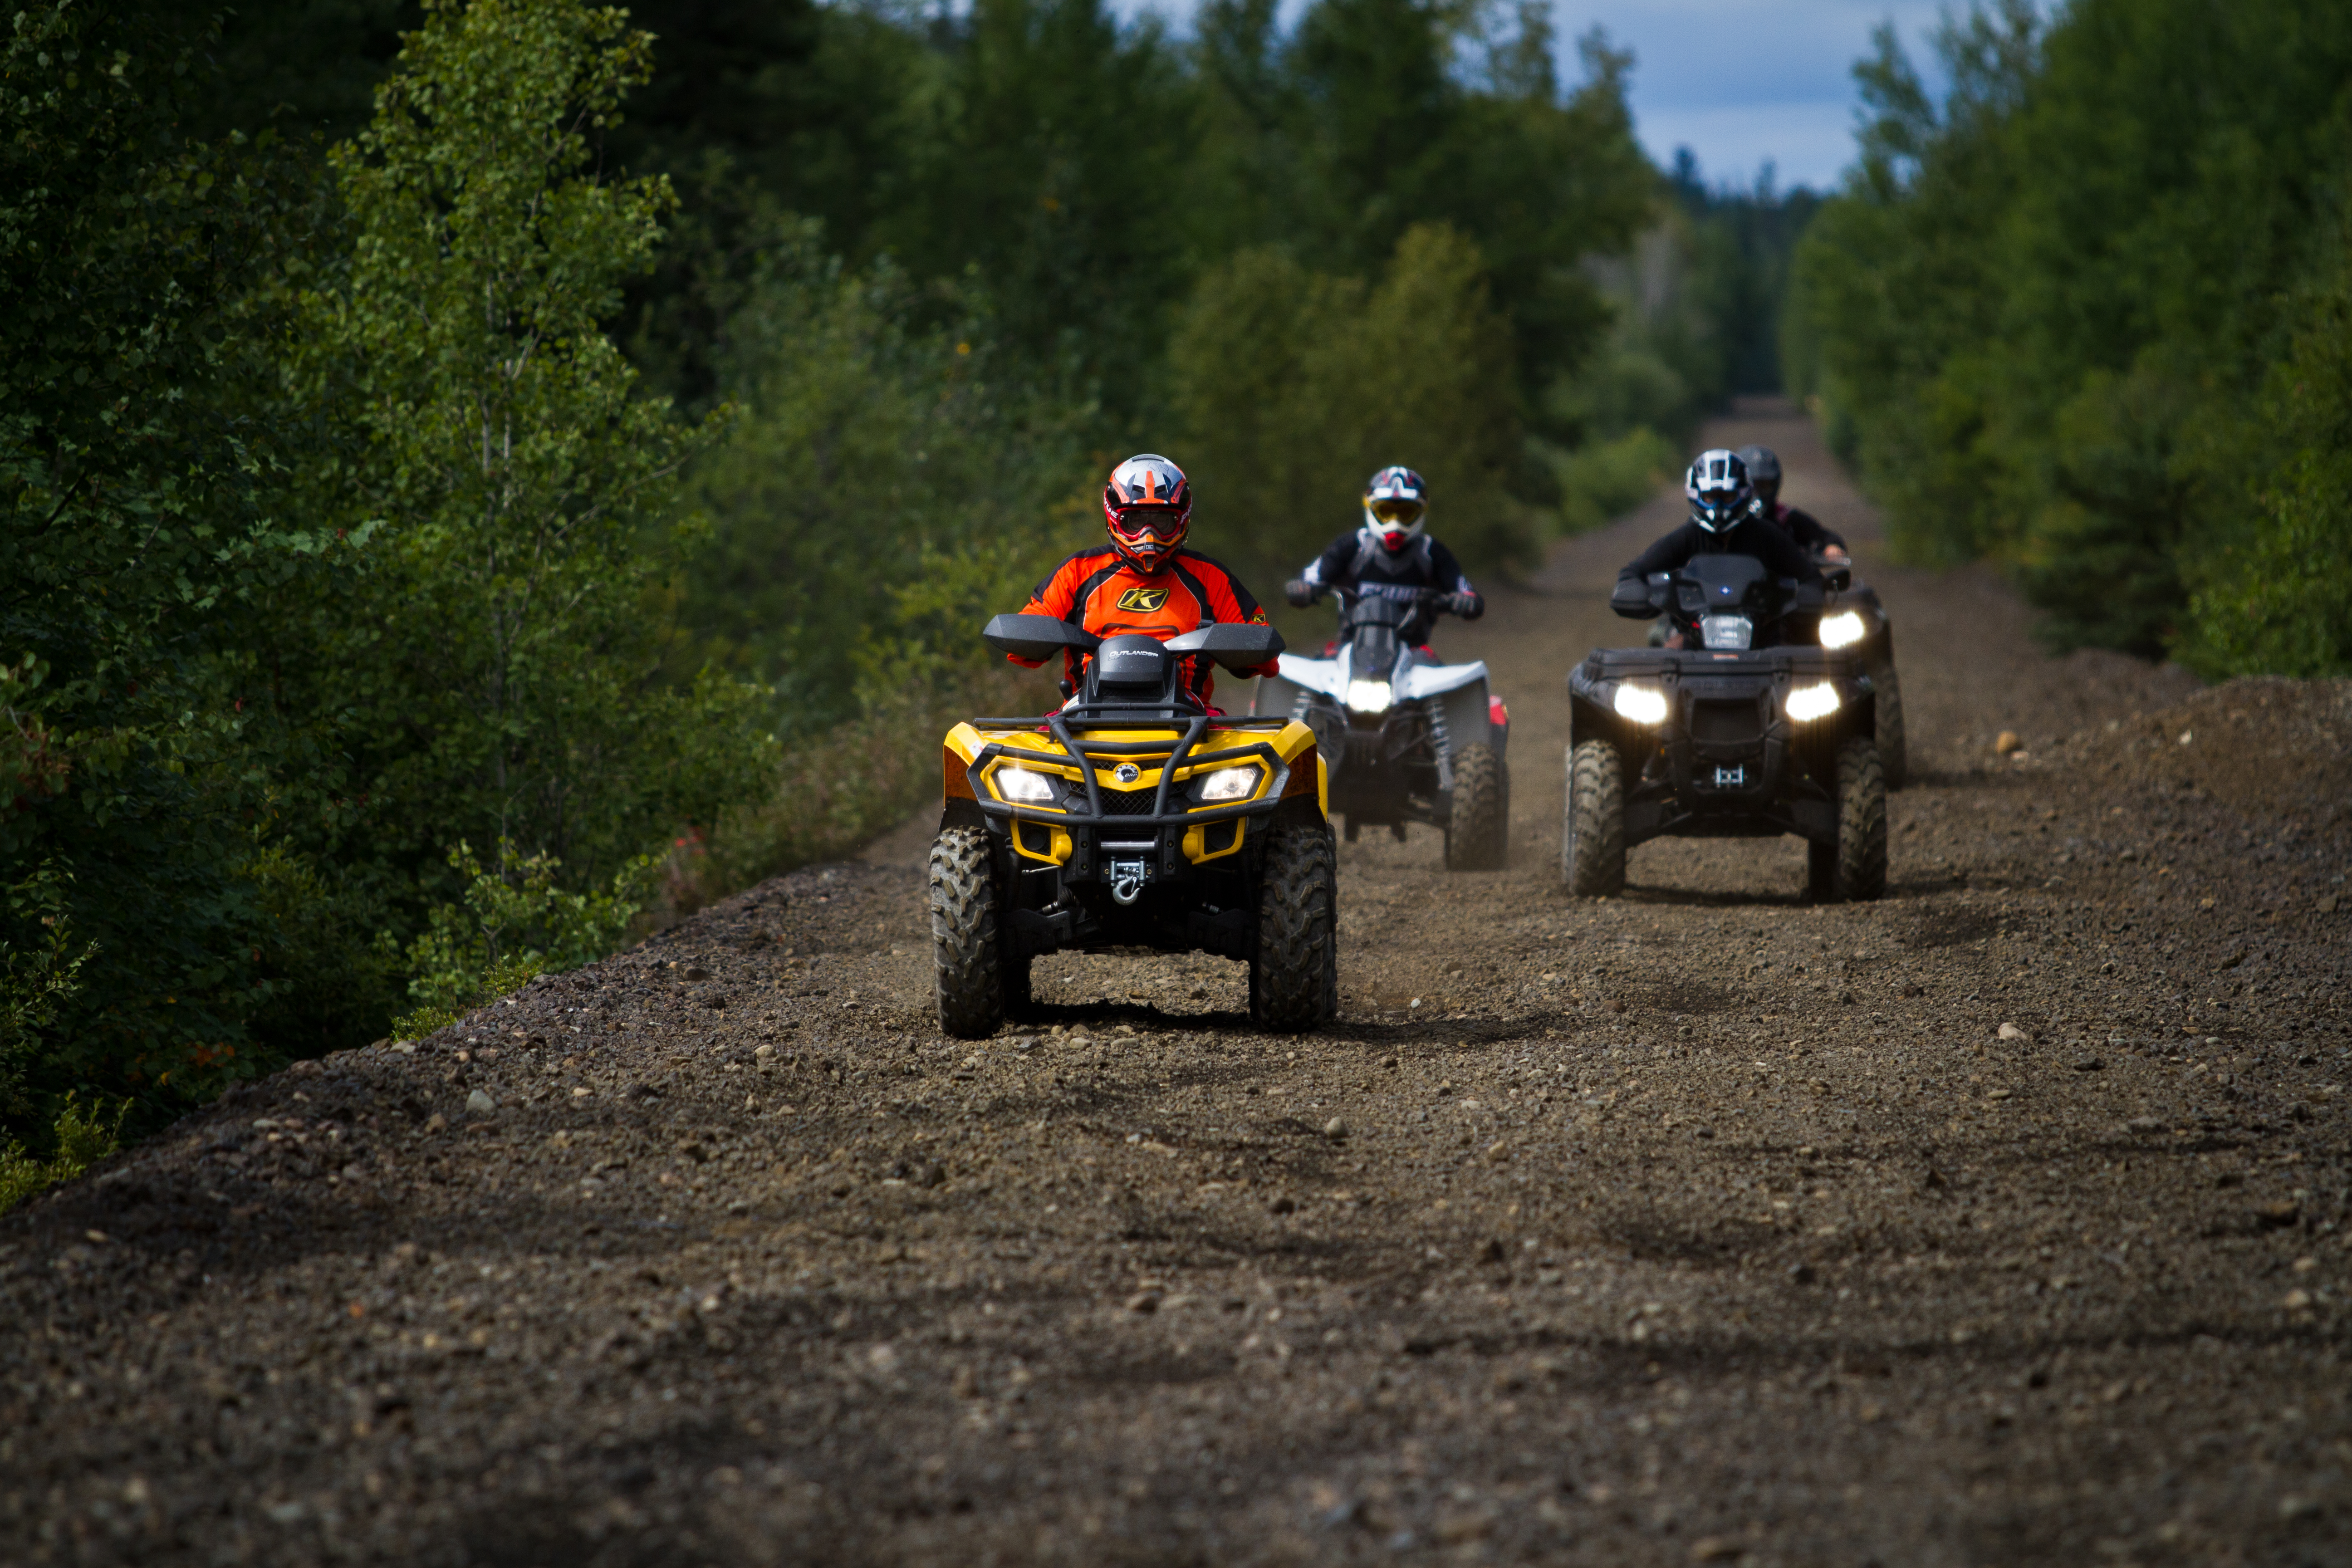 3 people on ATVs riding down a gravel road with thick green forest on either side.